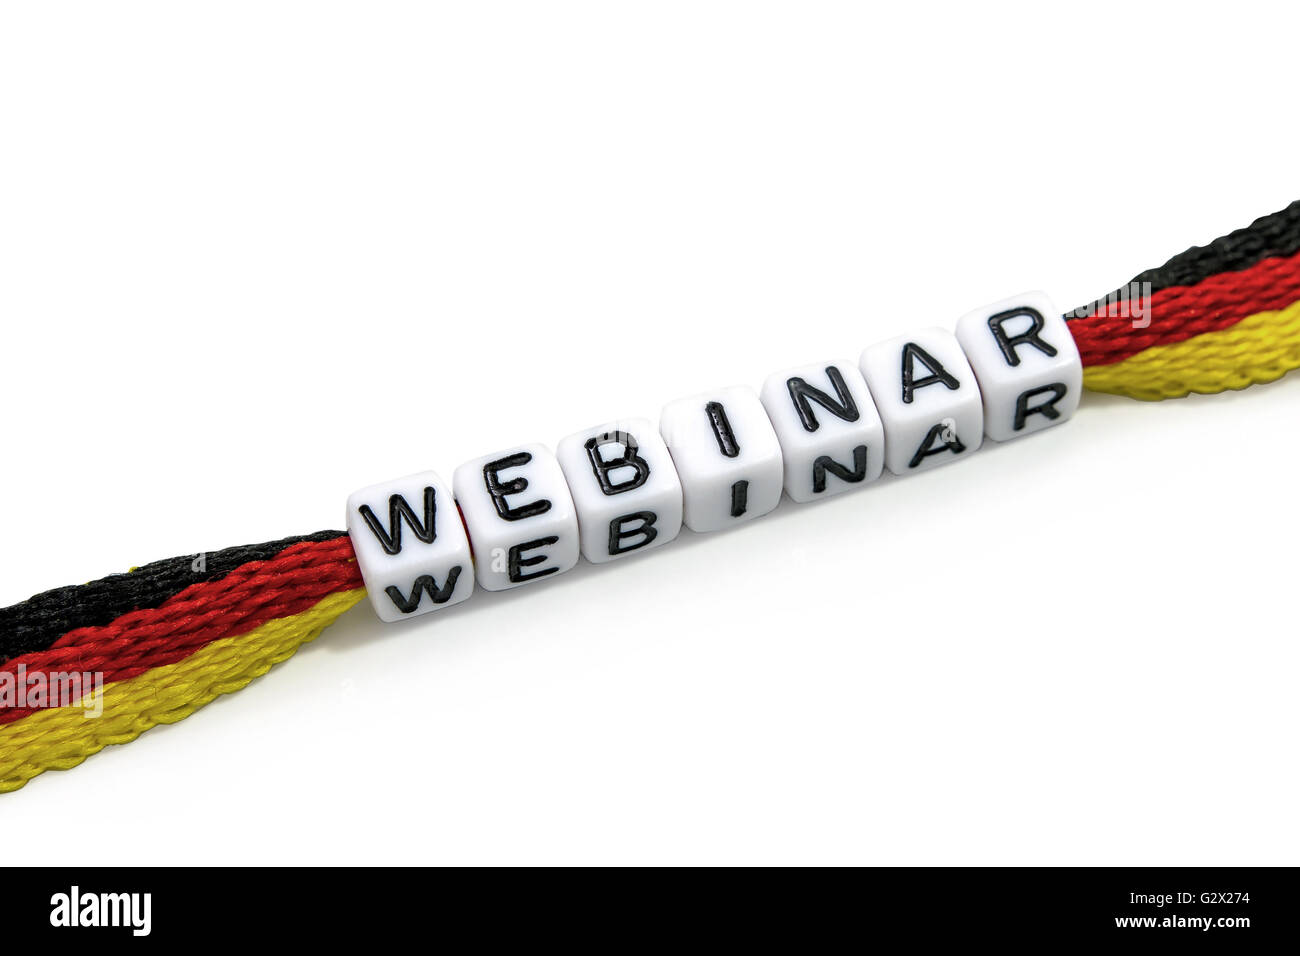 Word webinar from letter cubes on German Flag, isolated Stock Photo